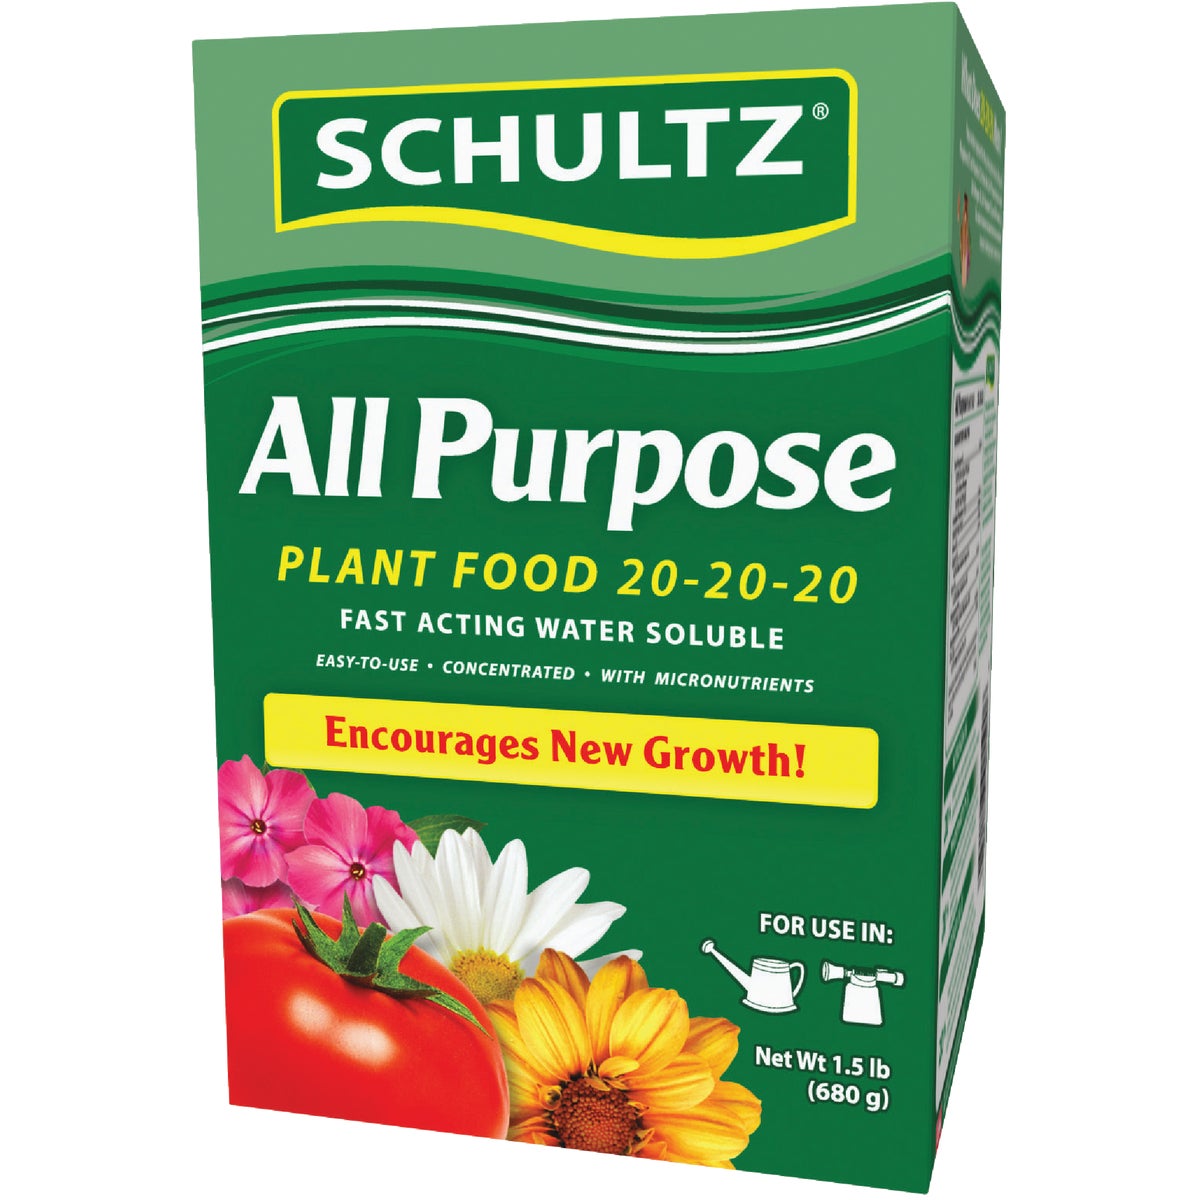 Schultz 1.5 Lb. 20-20-20 All Purpose Fast Acting Water Soluble Plant Food